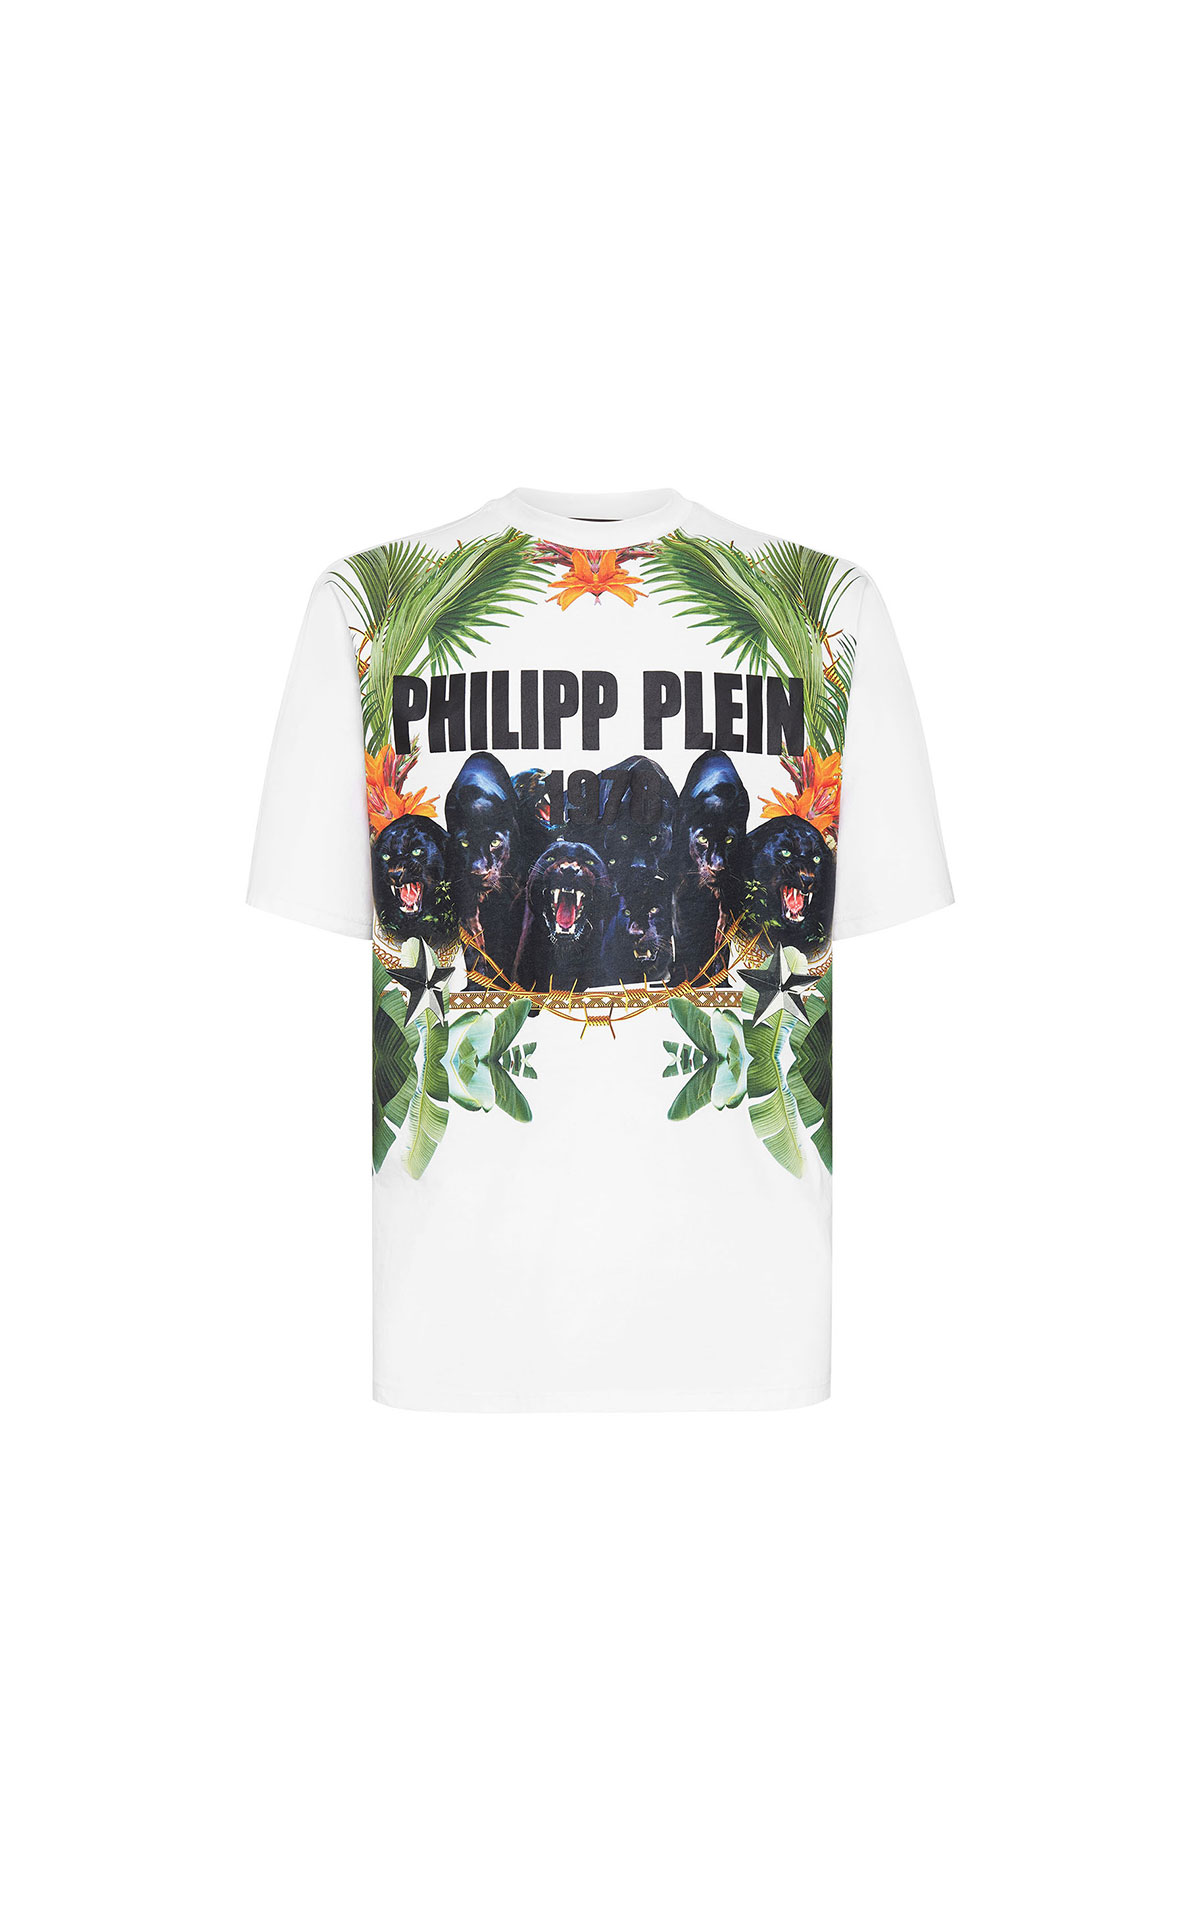 Phillip Plein T-shirt paradise panther edition  from Bicester Village